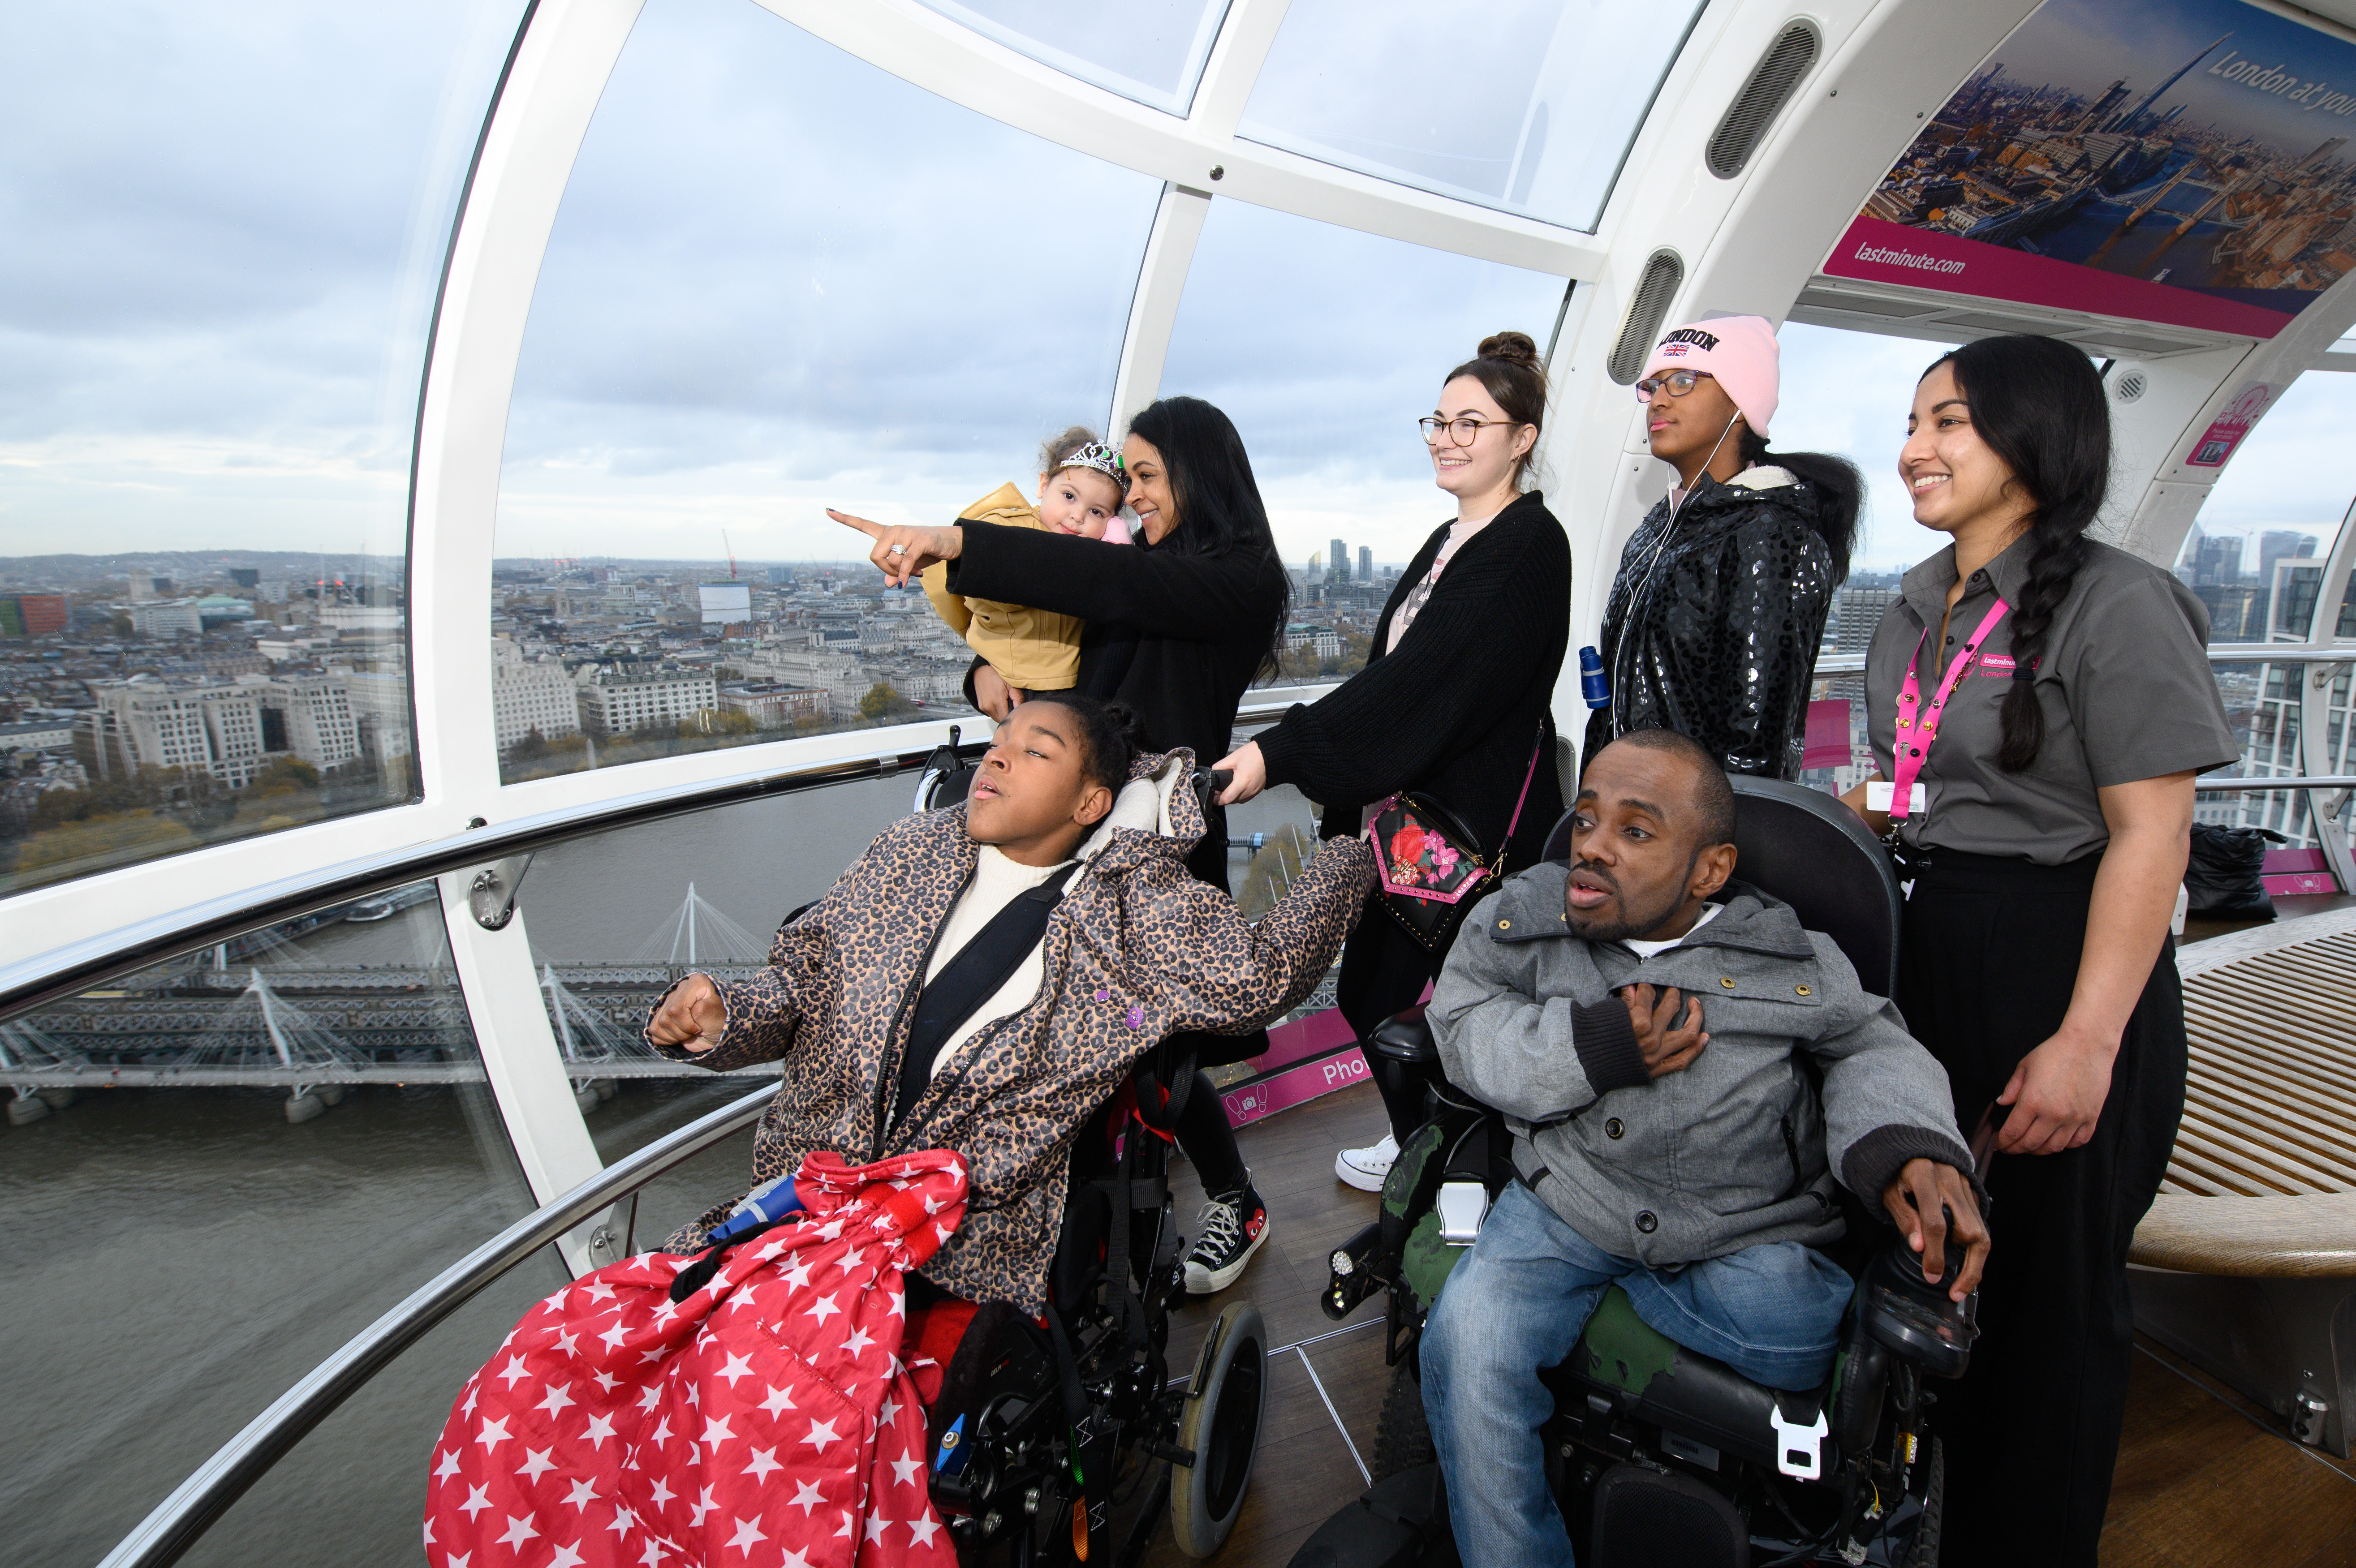 A family and friends enjoy a Magical Day Out on the London Eye 